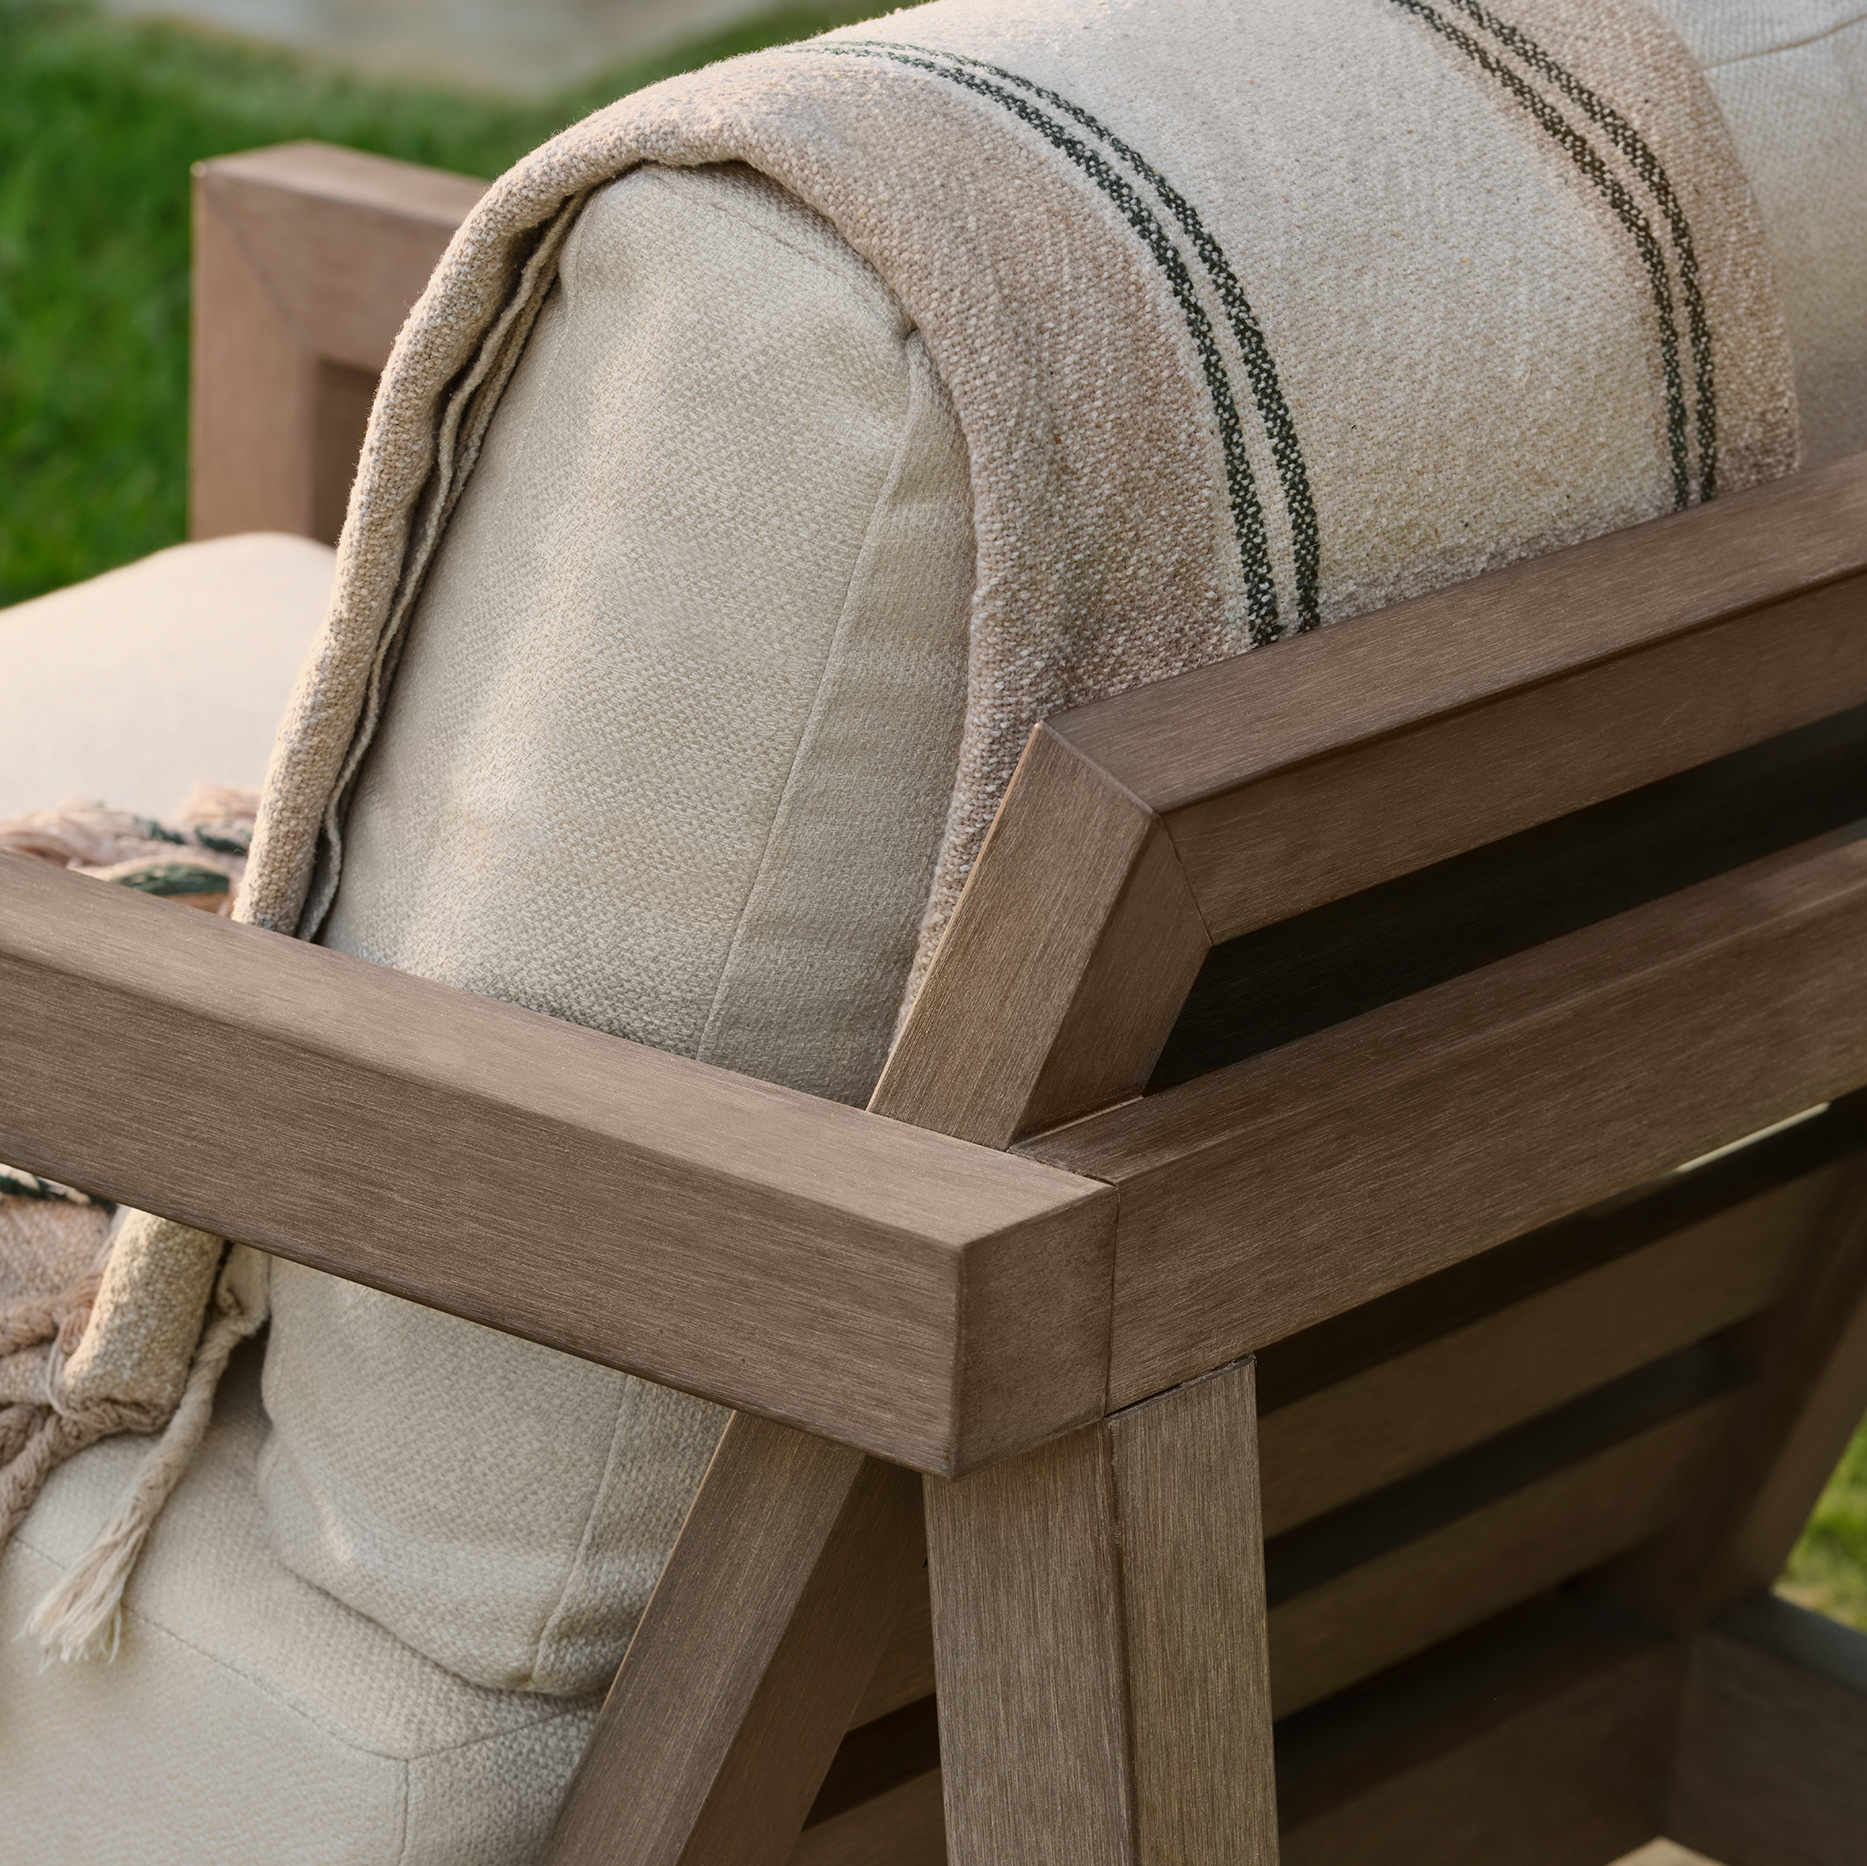 Detail view of the NexTeak finish on the Woodard Sierra Lounge Chair